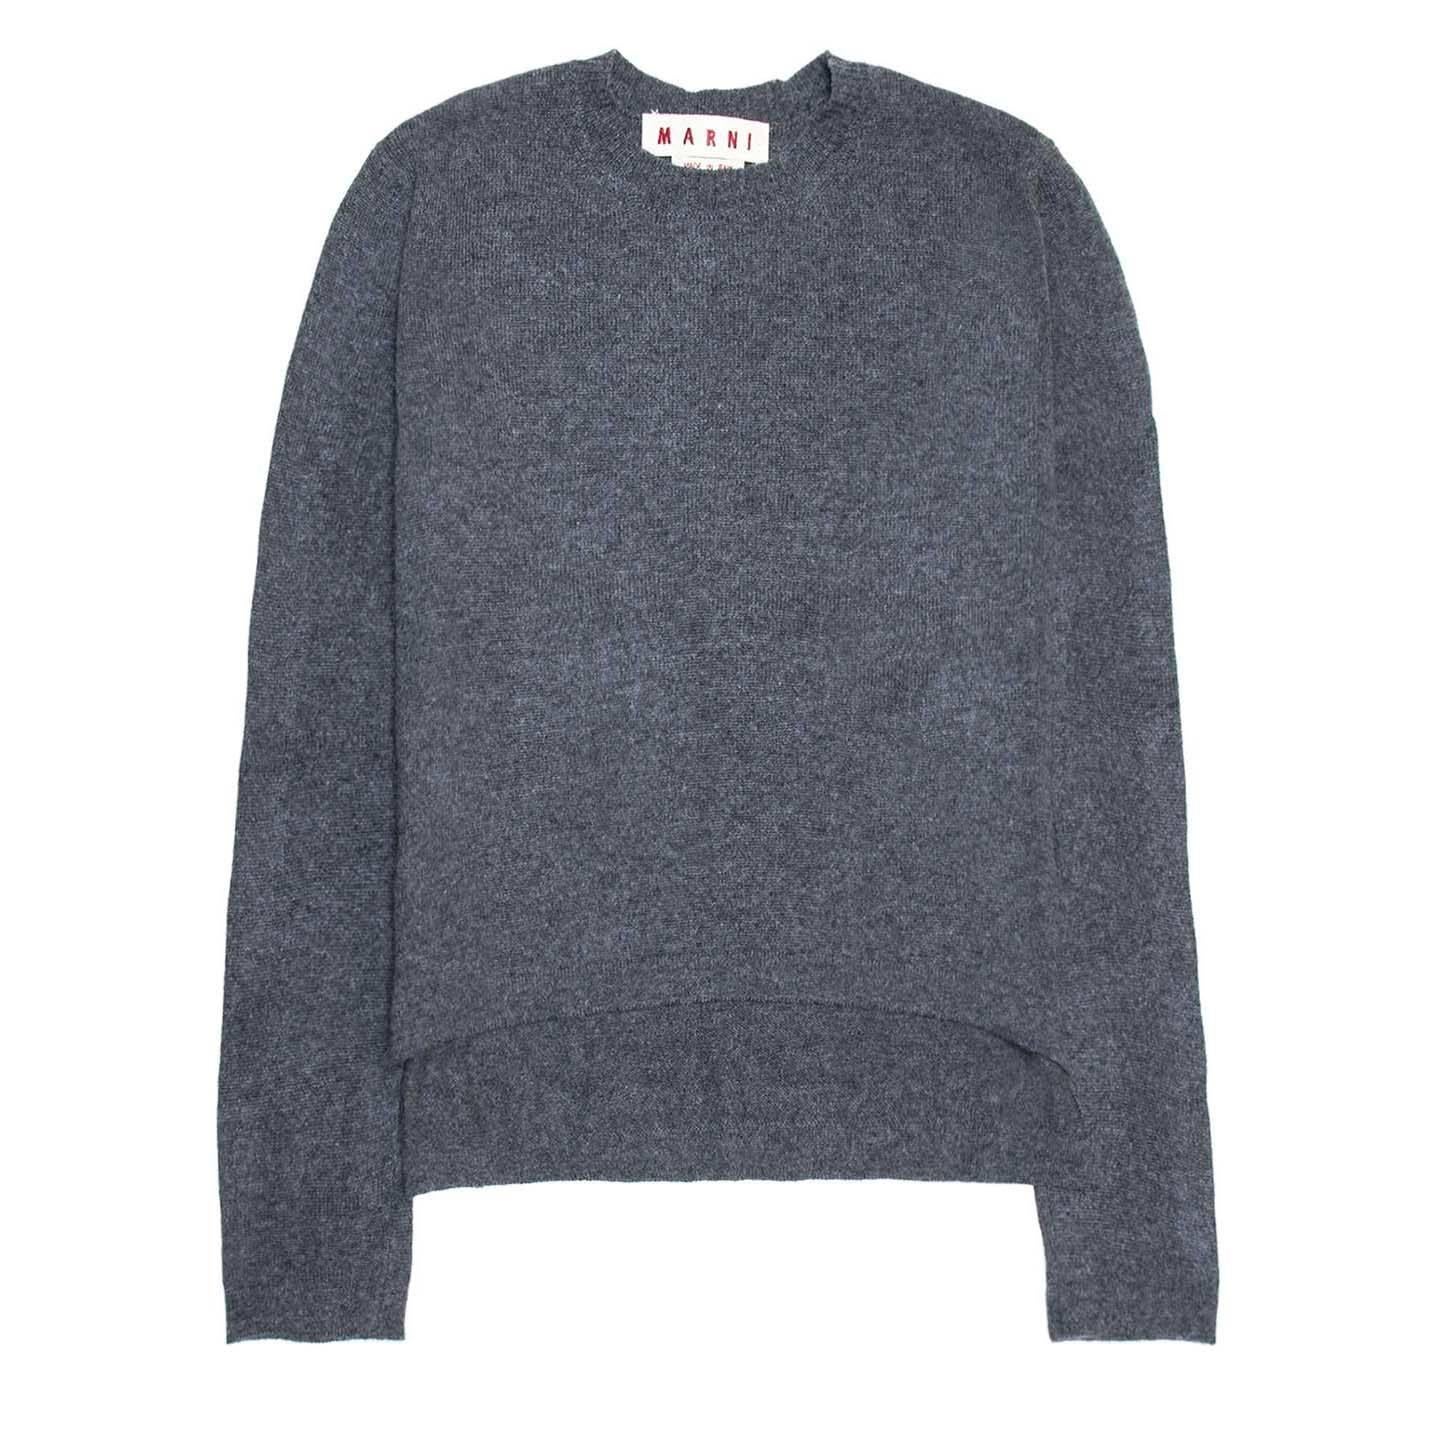 Charcoal grey crew neck cashmere pullover. The fit is boxy and the hem at the back is two inches longer than the front.

Size  44 Italian sizing

Condition  Excellent: never worn